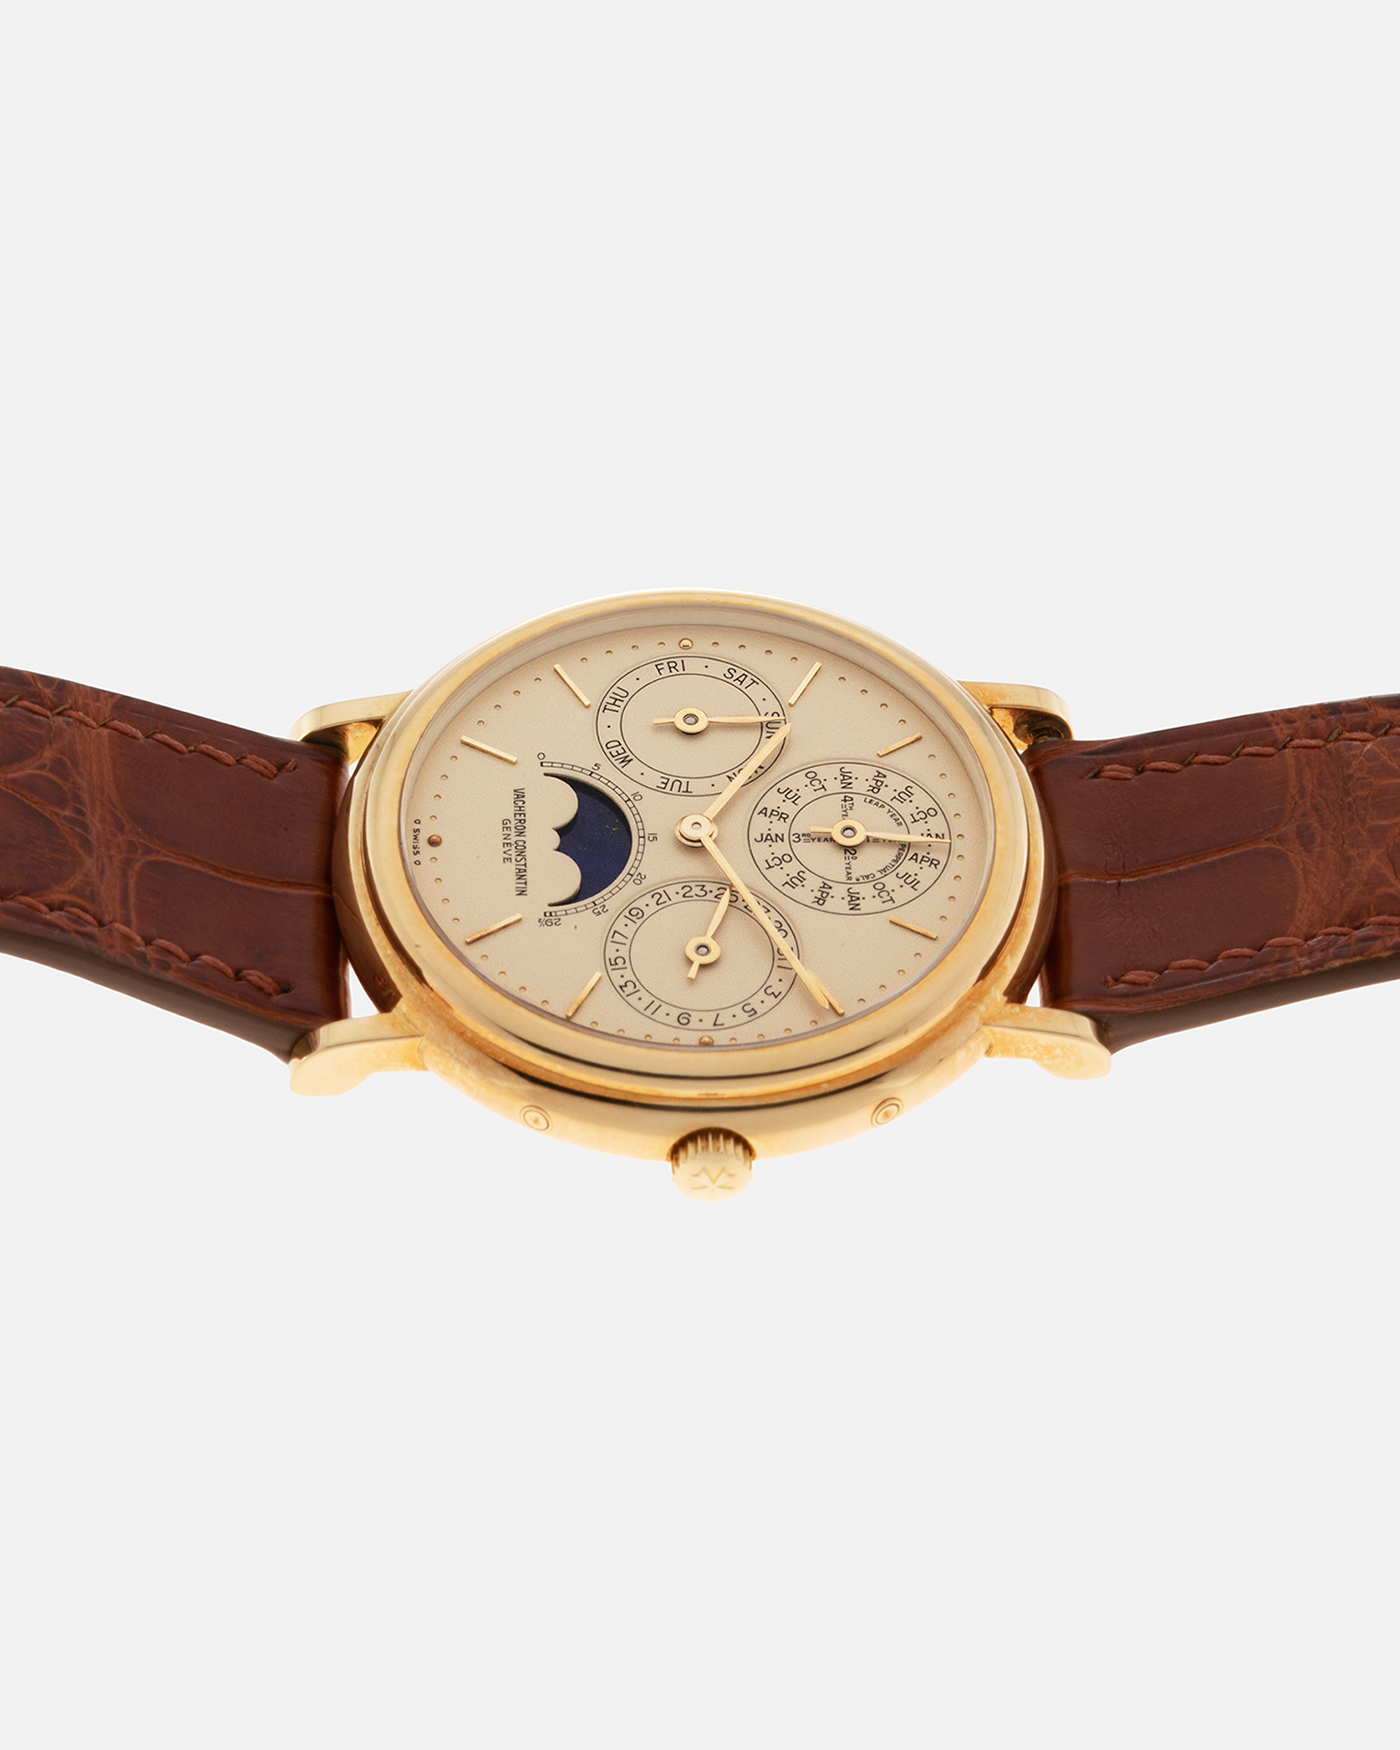 Brand: Vacheron Constantin Year: 1990’s Model: Perpetual Calendar Reference Number: 43031 Material: 18-carat Yellow Gold Movement: Vacheron Constantin Cal. 1120/2 (based on JLC Cal. 920), Self-Winding Case Diameter: 36mm Bracelet: Generic Brown Crocodile Leather Strap with Signed 18-carat Yellow Gold Deployant Clasp